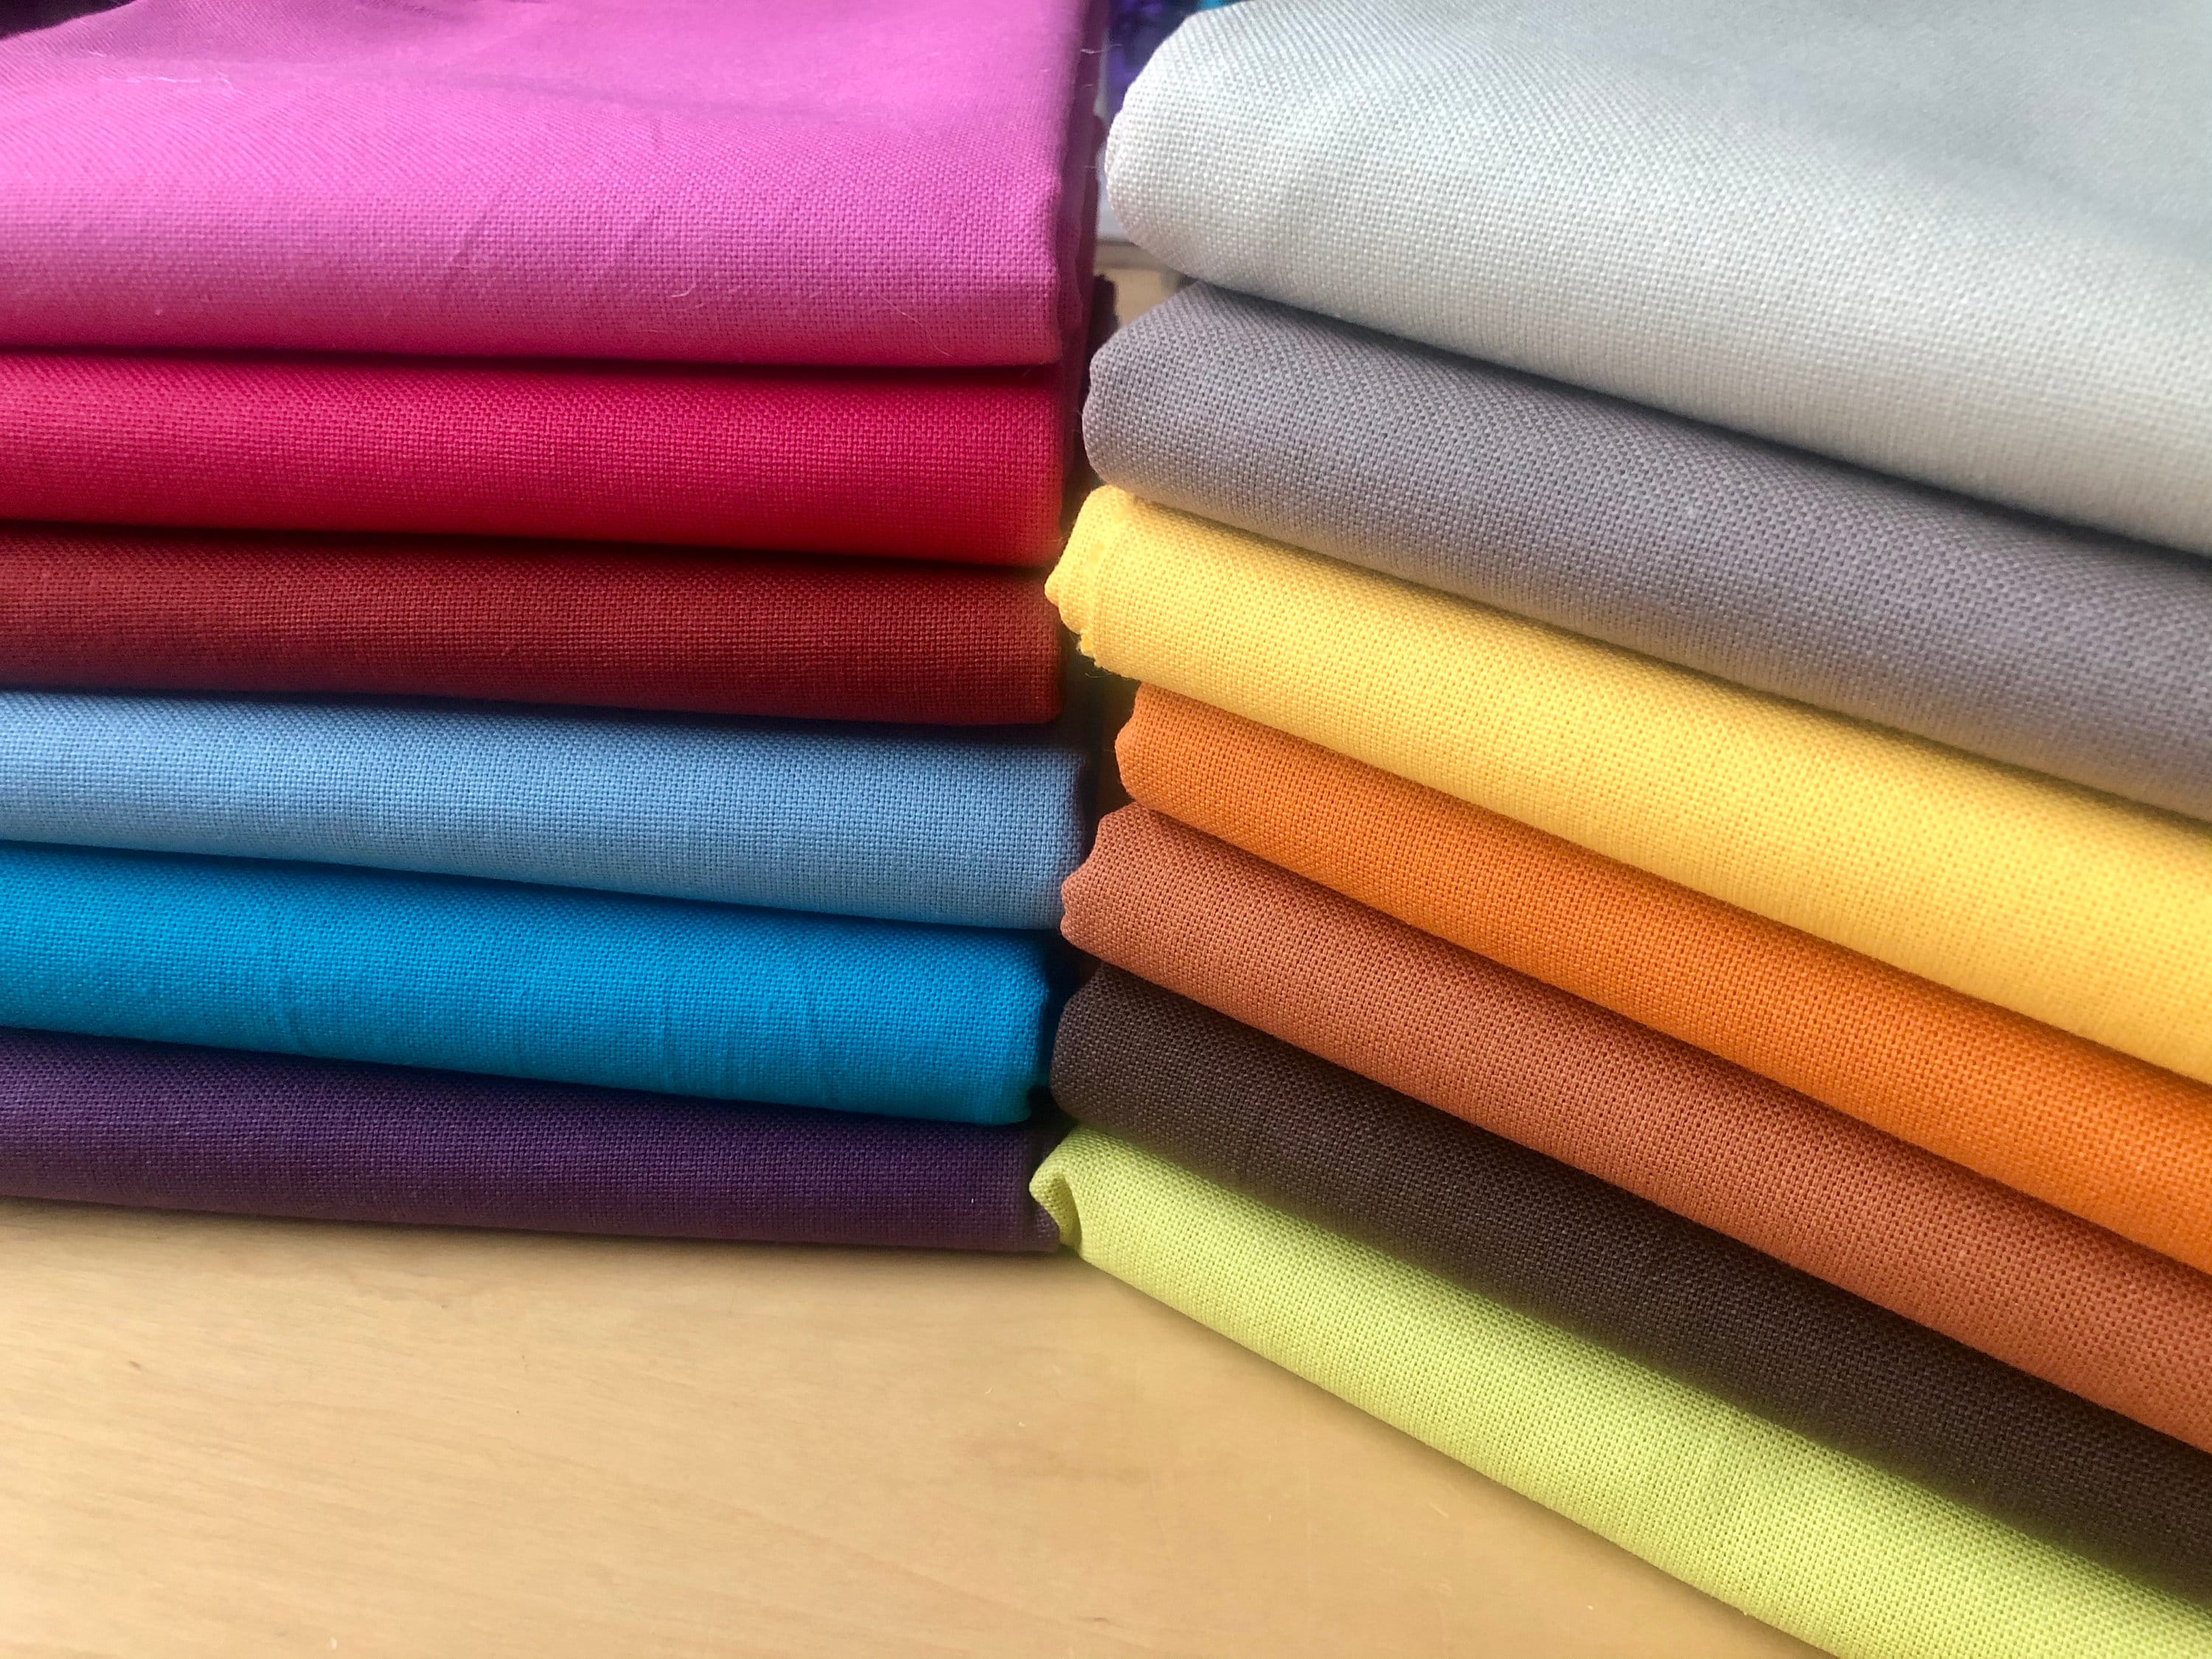 Plain Ottoman Fabric For Curtains Upholstery Cotton Canvas Material 140cm  wide - ECRU - Lush Fabric